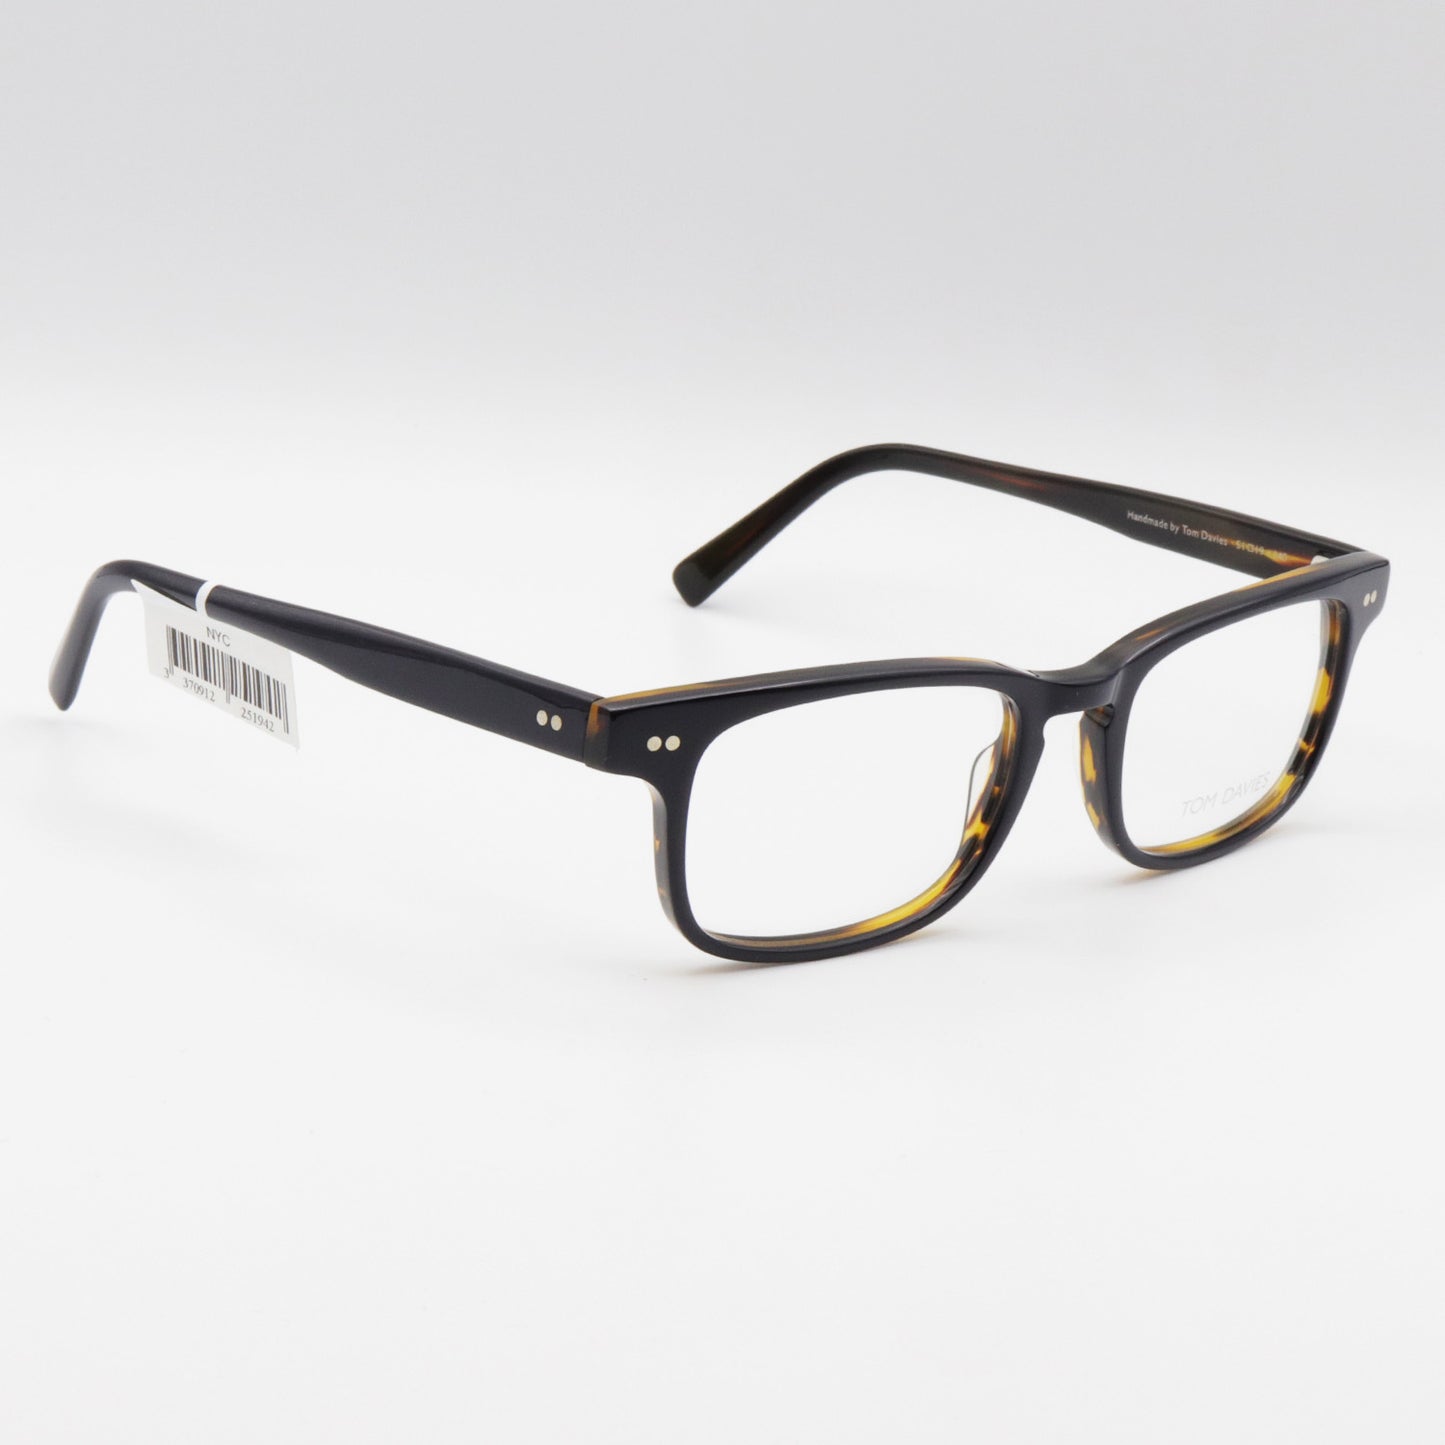 TD421 1171 Tom Davies Navy Blue and Brown Optical Glasses